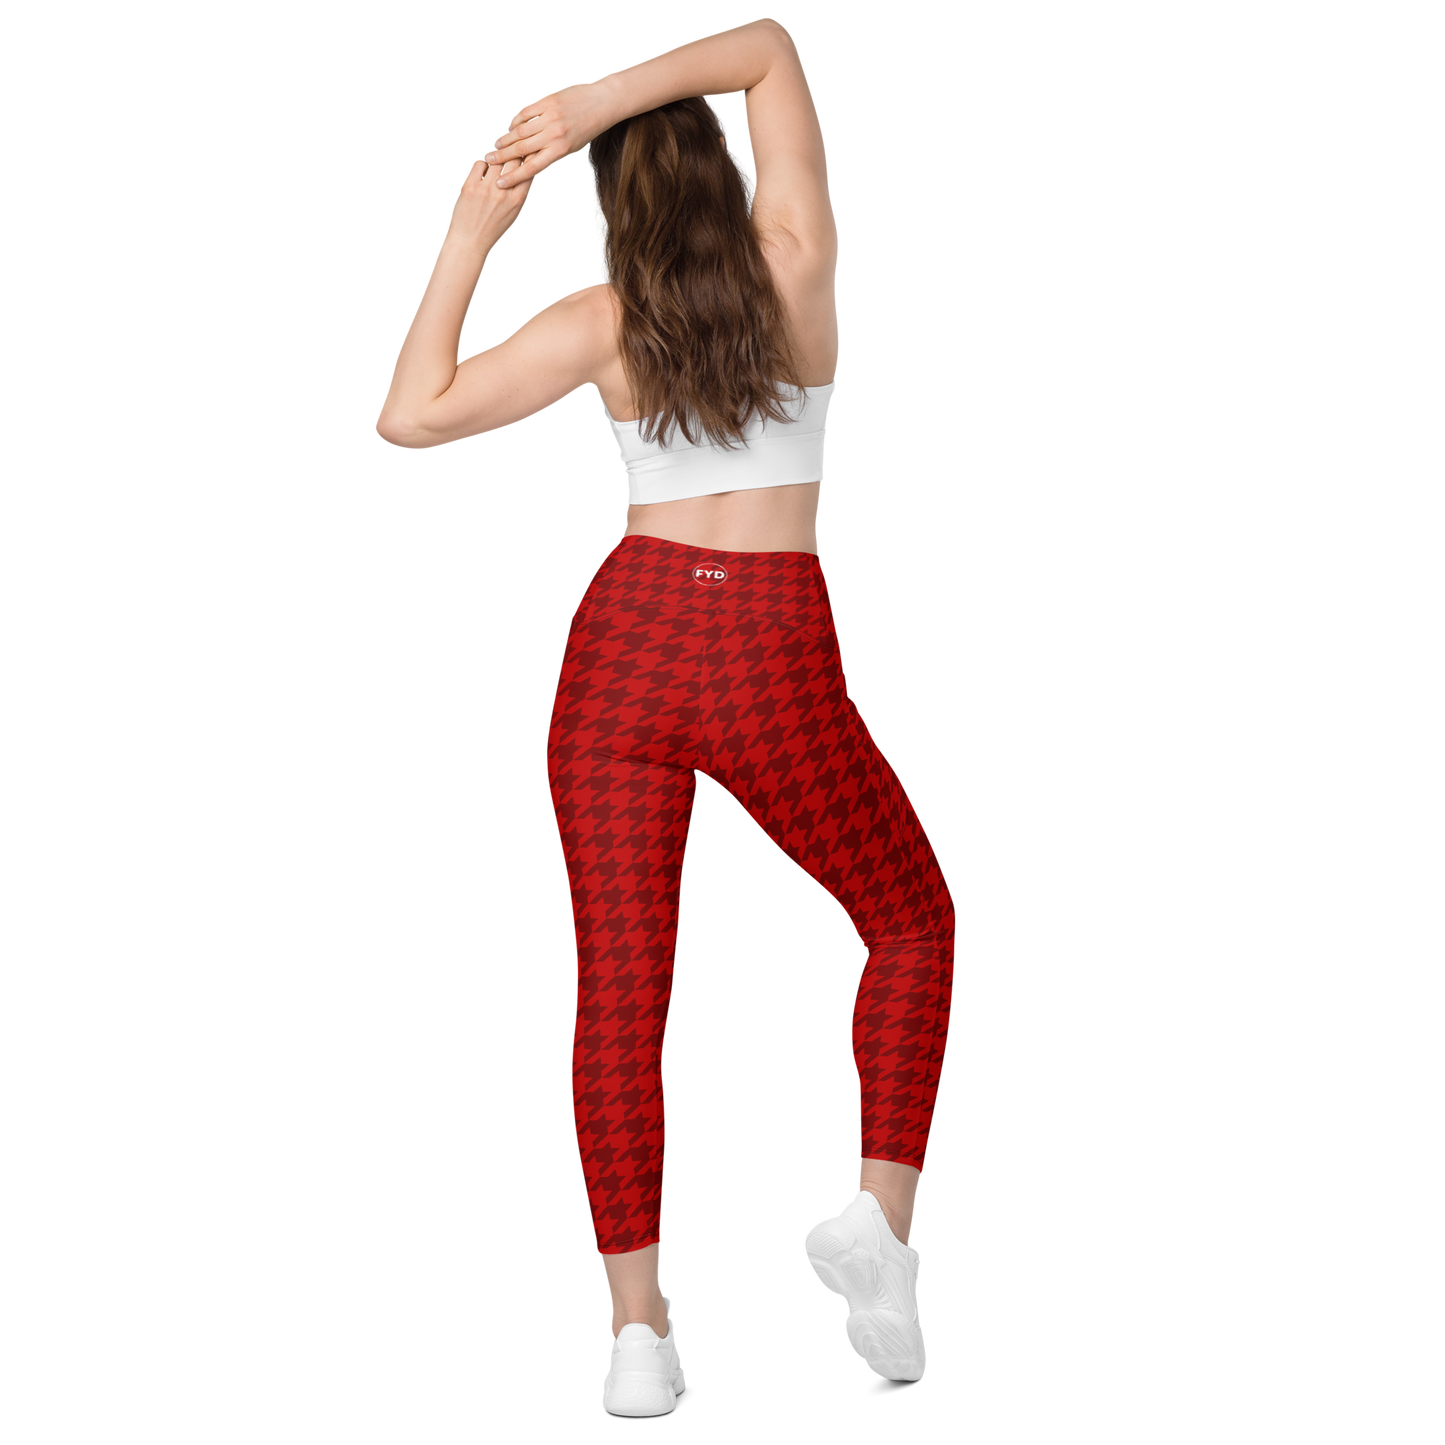 Size Inclusive Leggings with pockets in red houndstooth - familiar...yet different